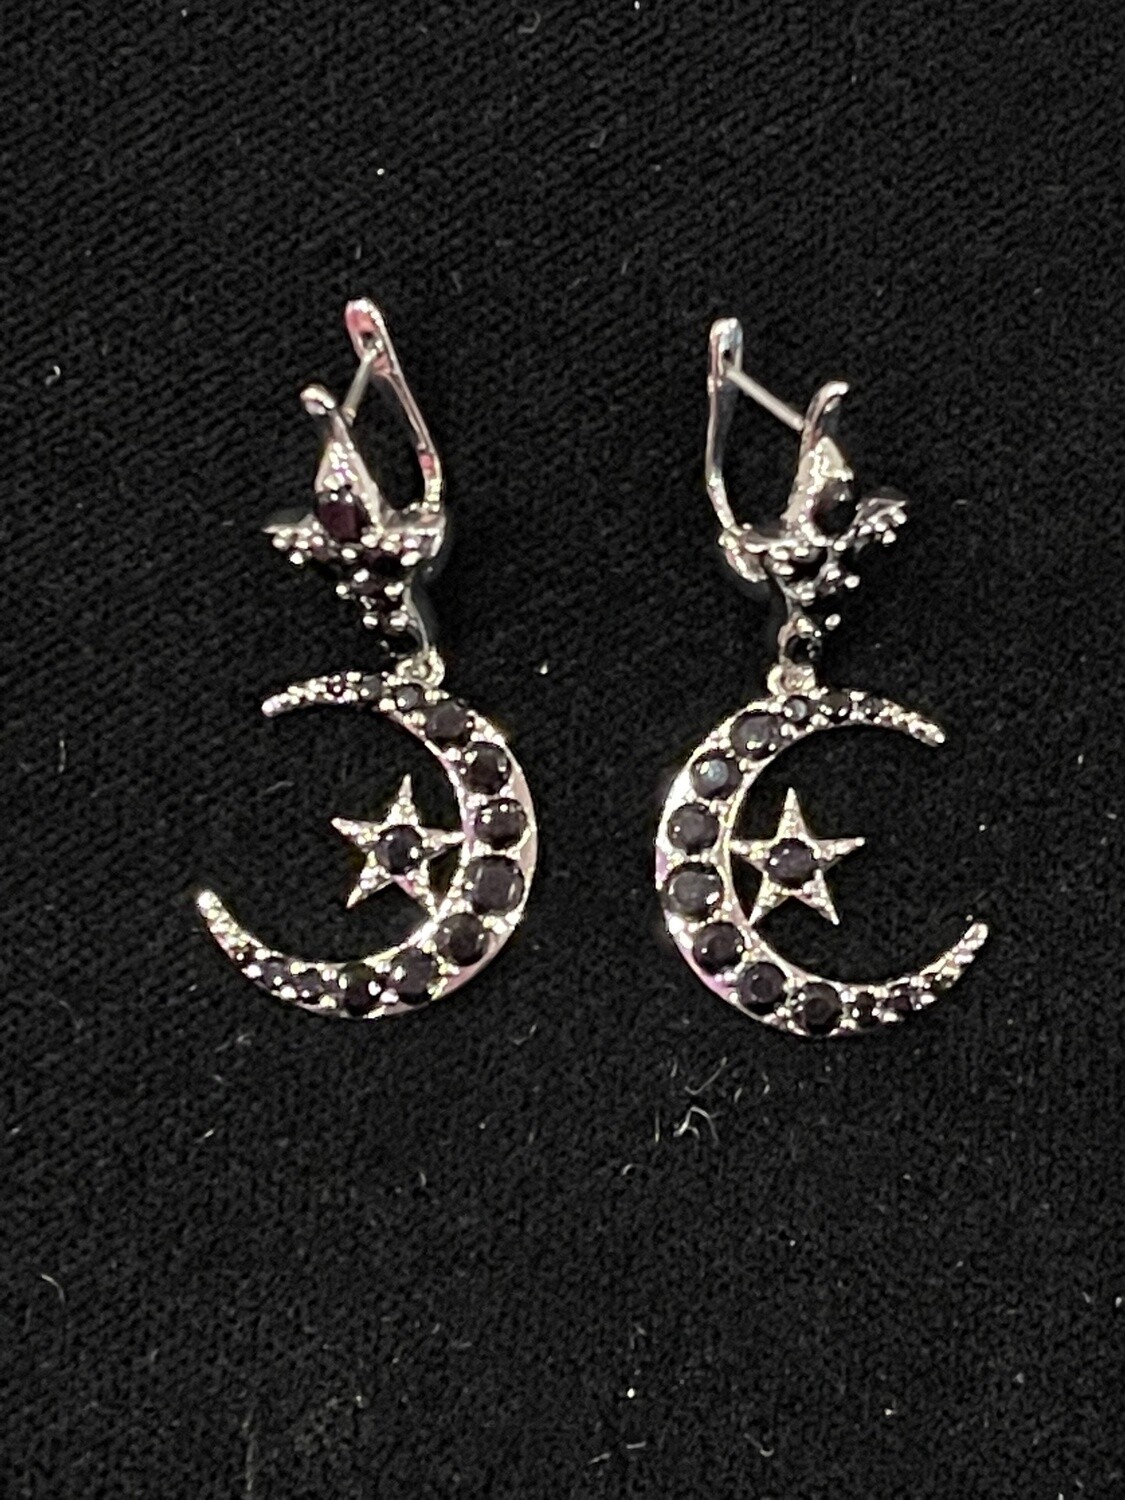 Victorian Mourning Earrings